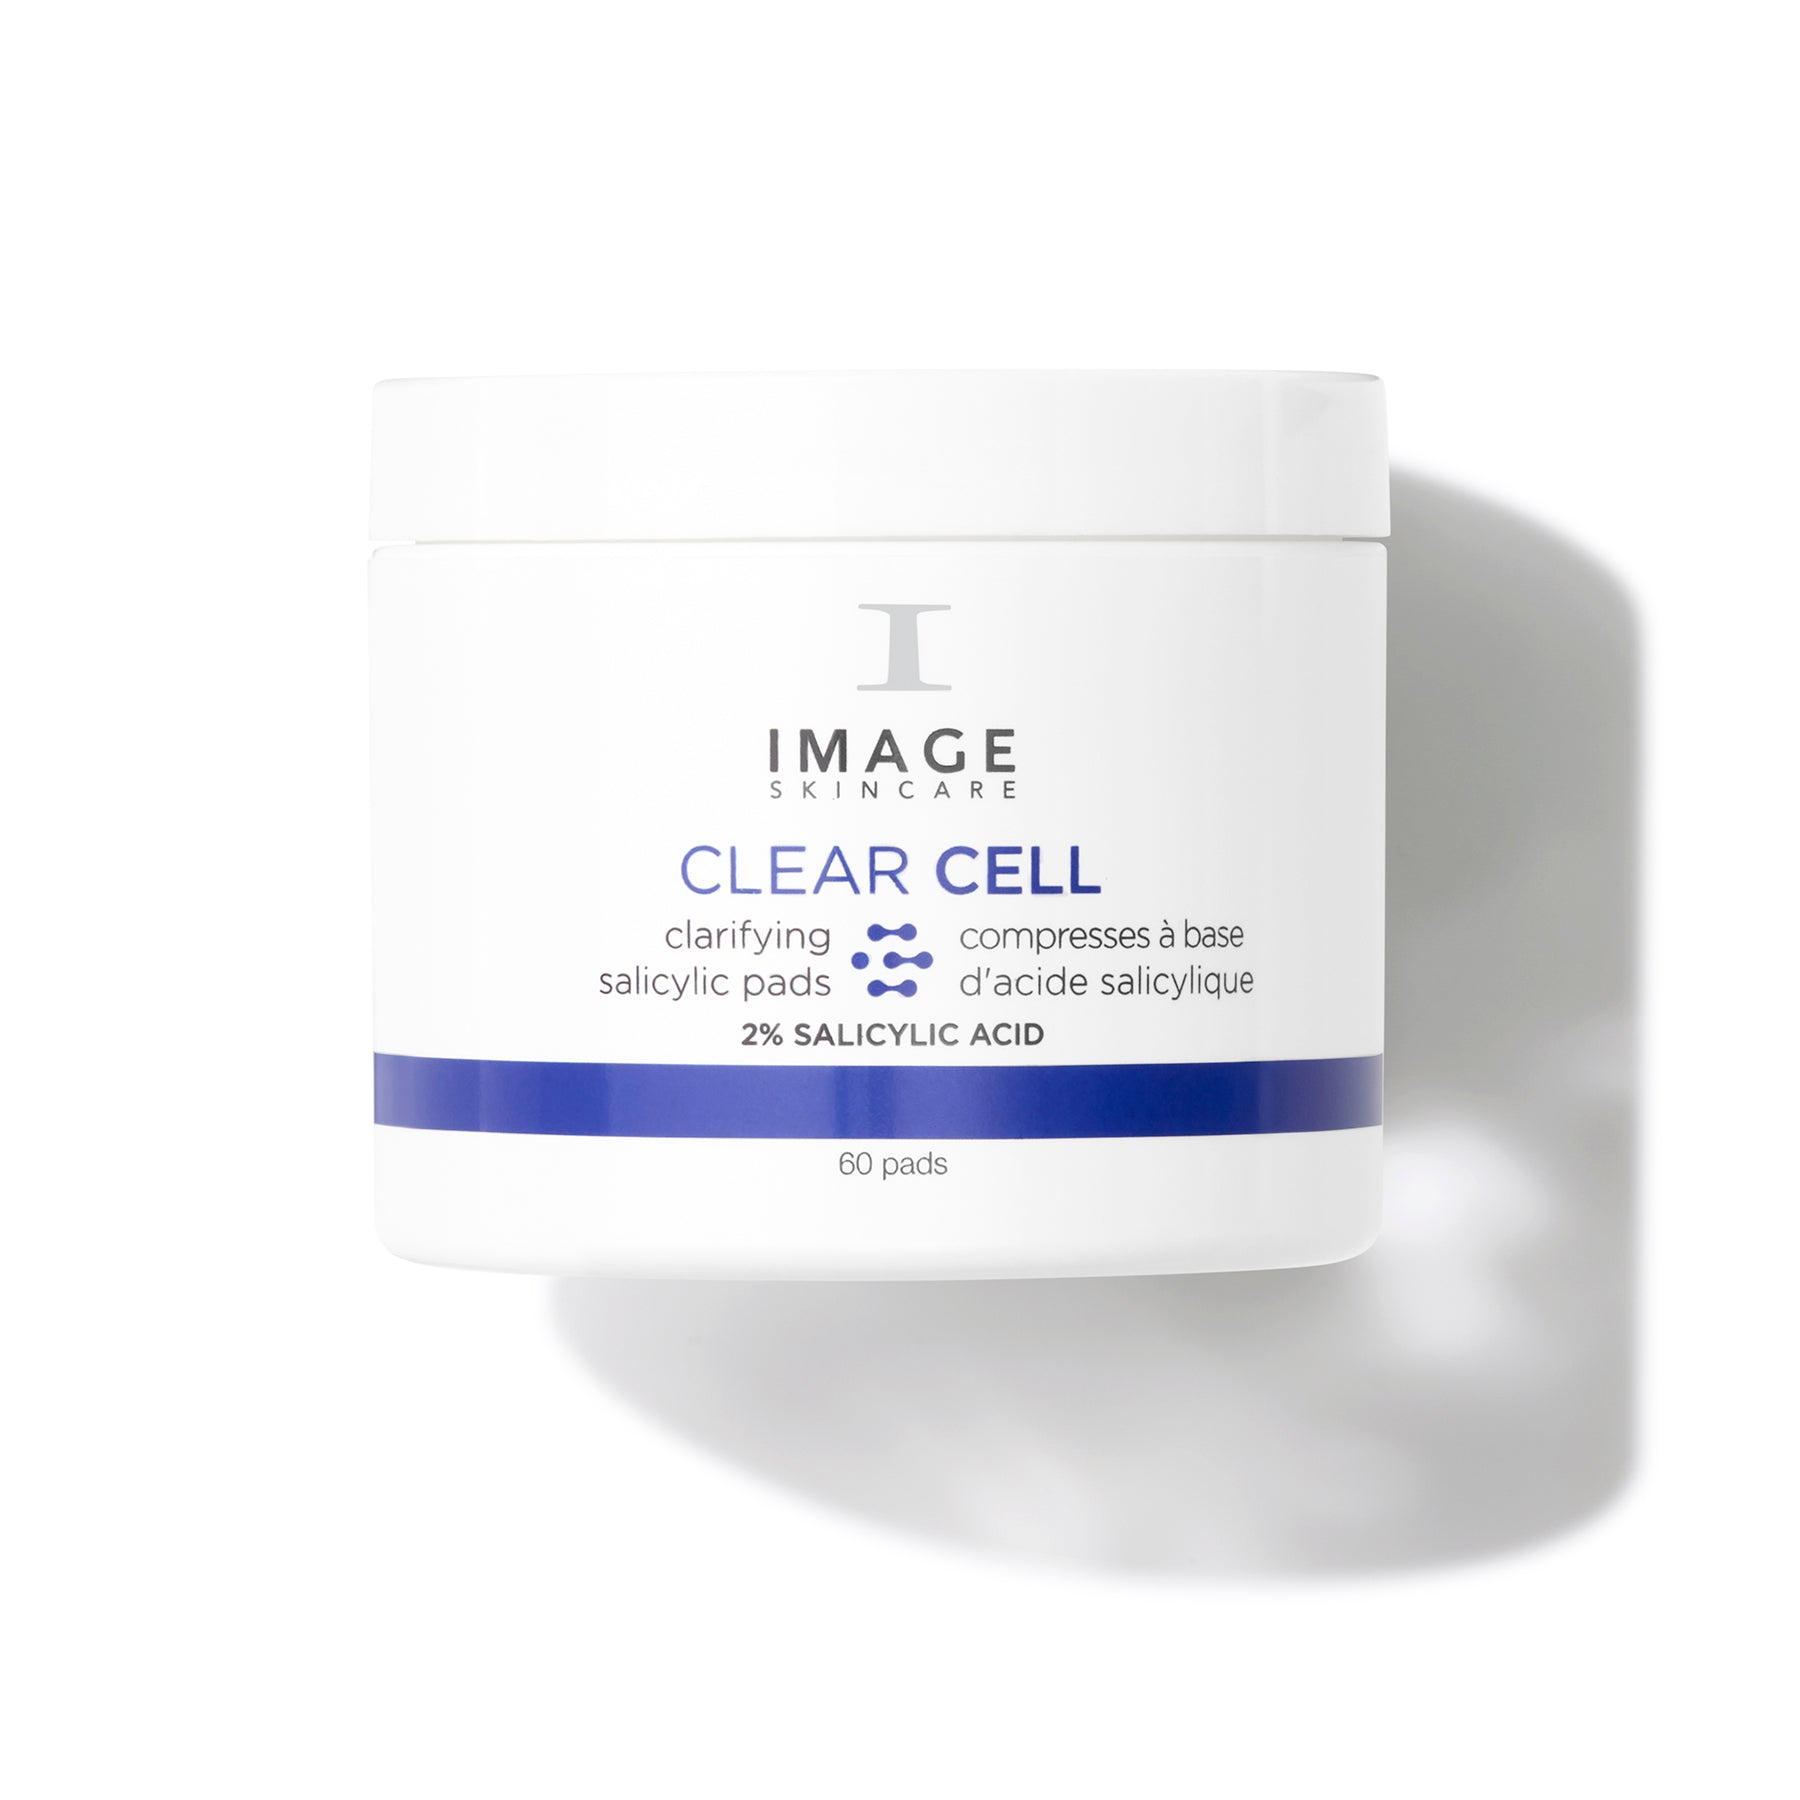 Glycolic acid Pads artfact. Max Clear image Skincare. Neogen PORERASER Clear BHA Pad. Clear cell